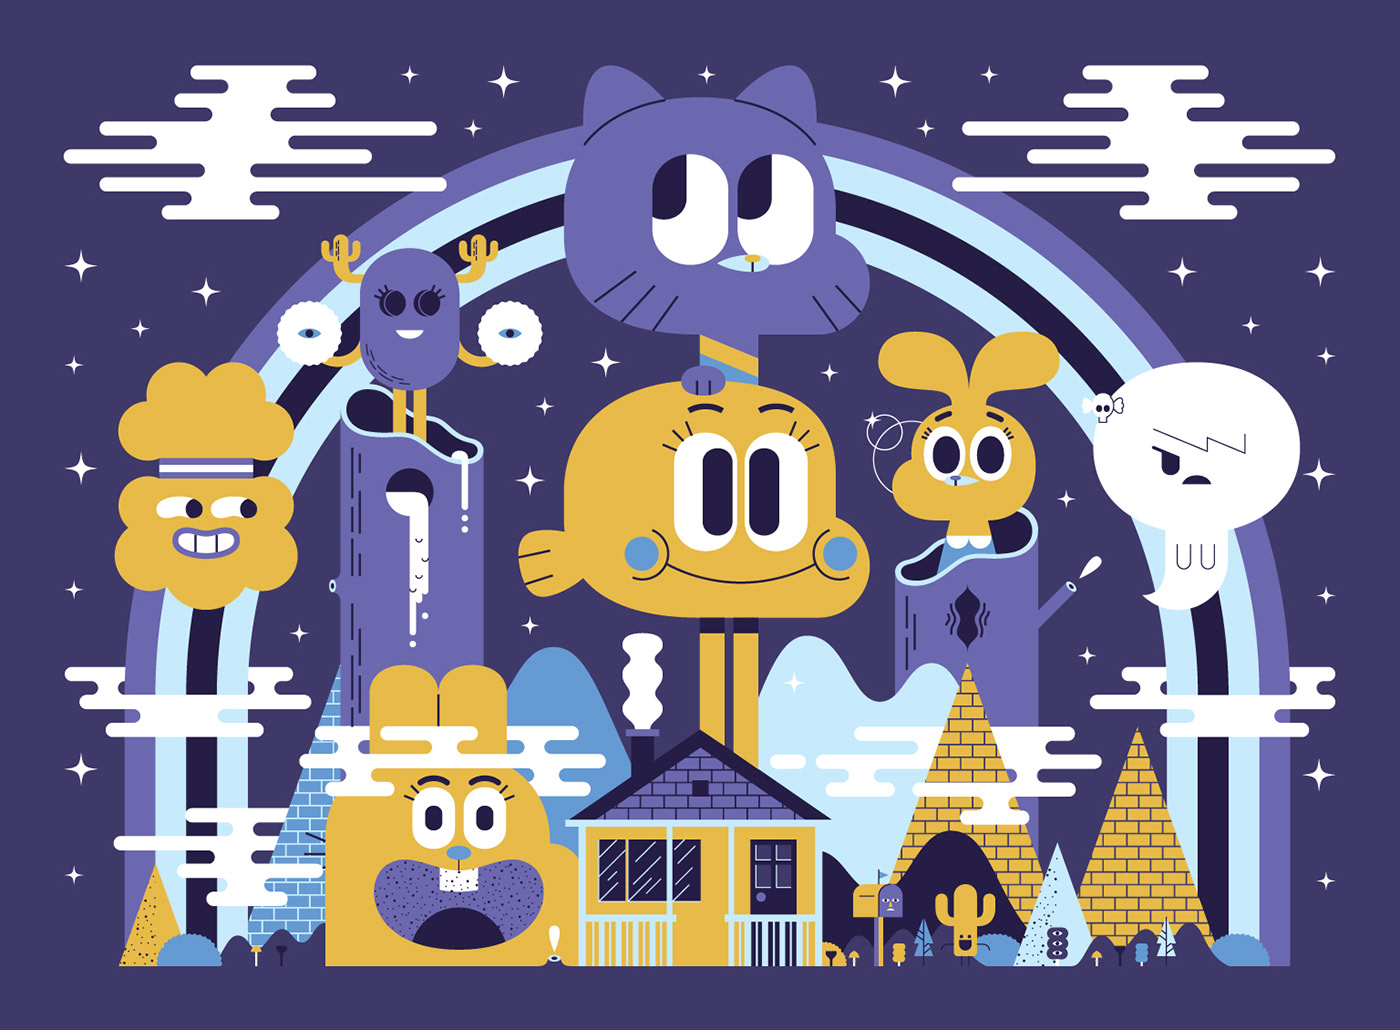 Online Game Illos and Animation for Cartoon Network on Behance